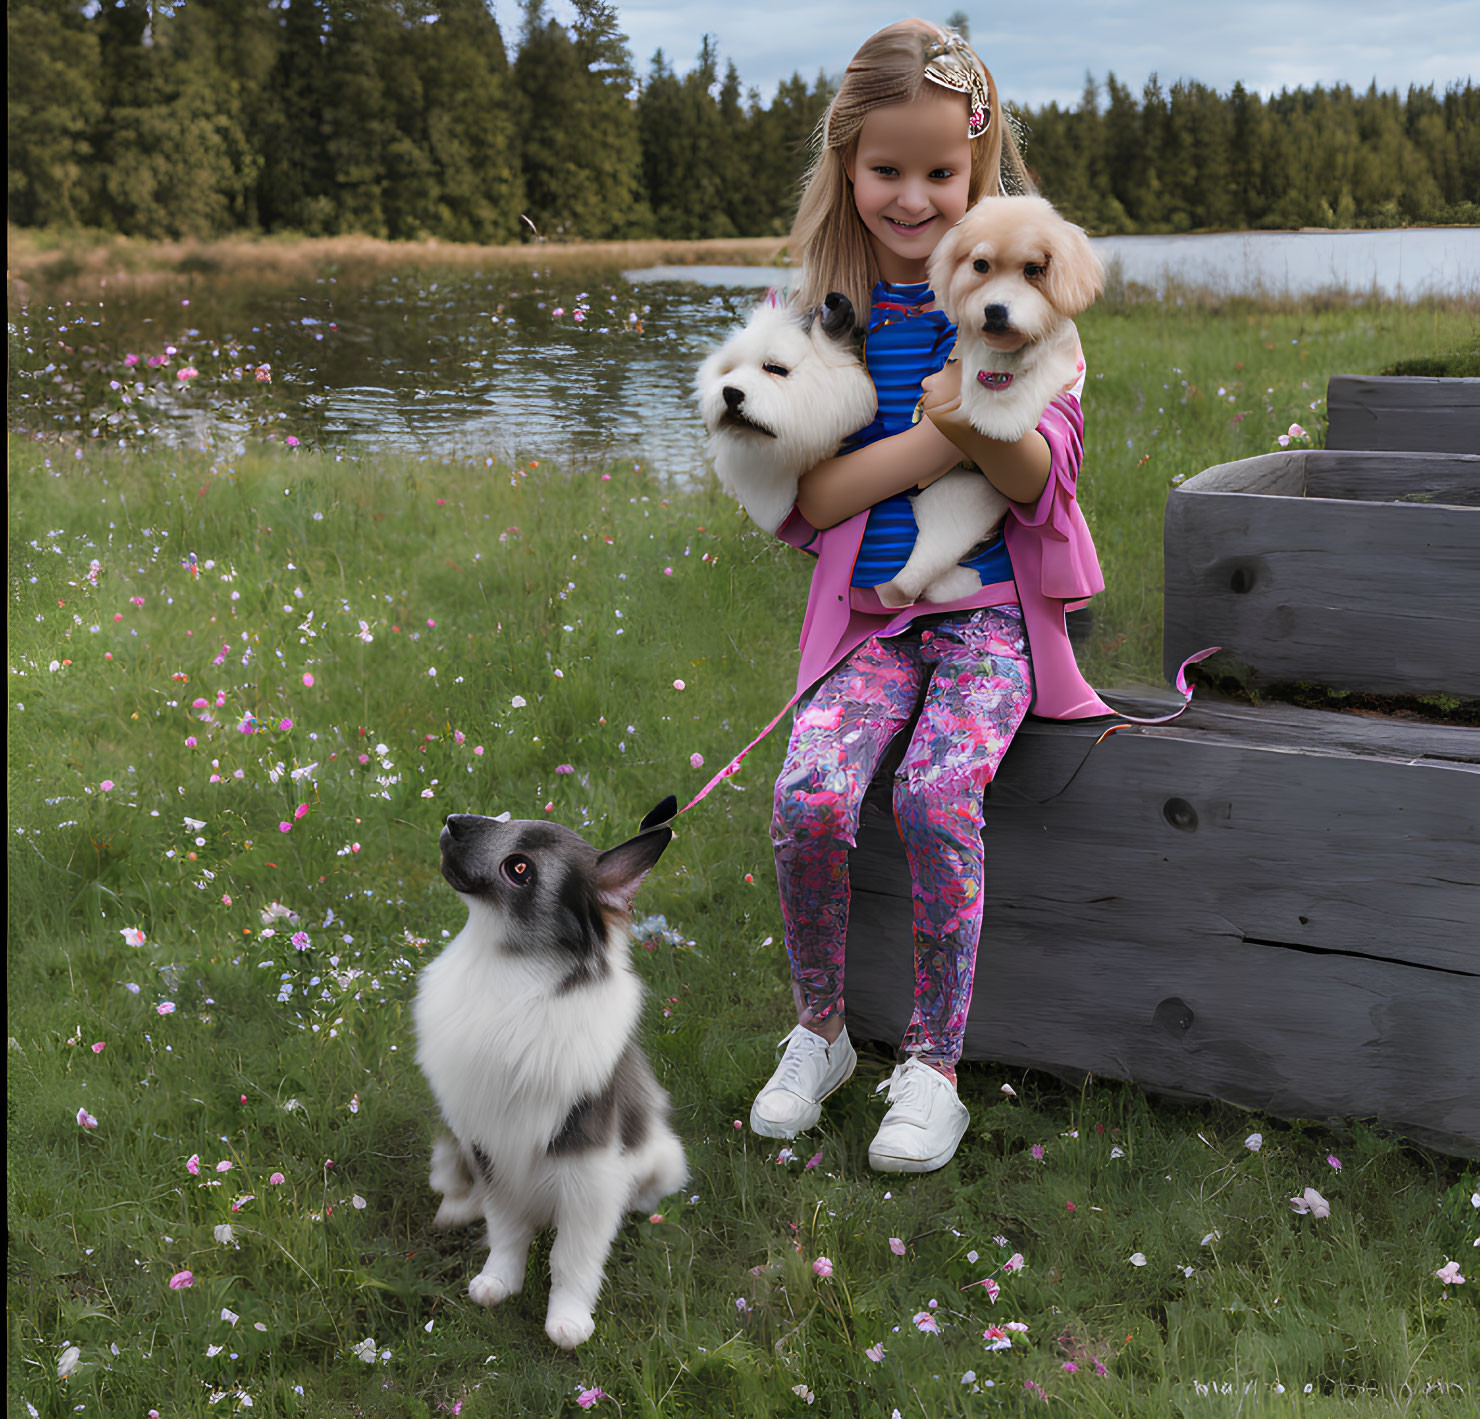 Young girl in pink jacket with white dogs by lake